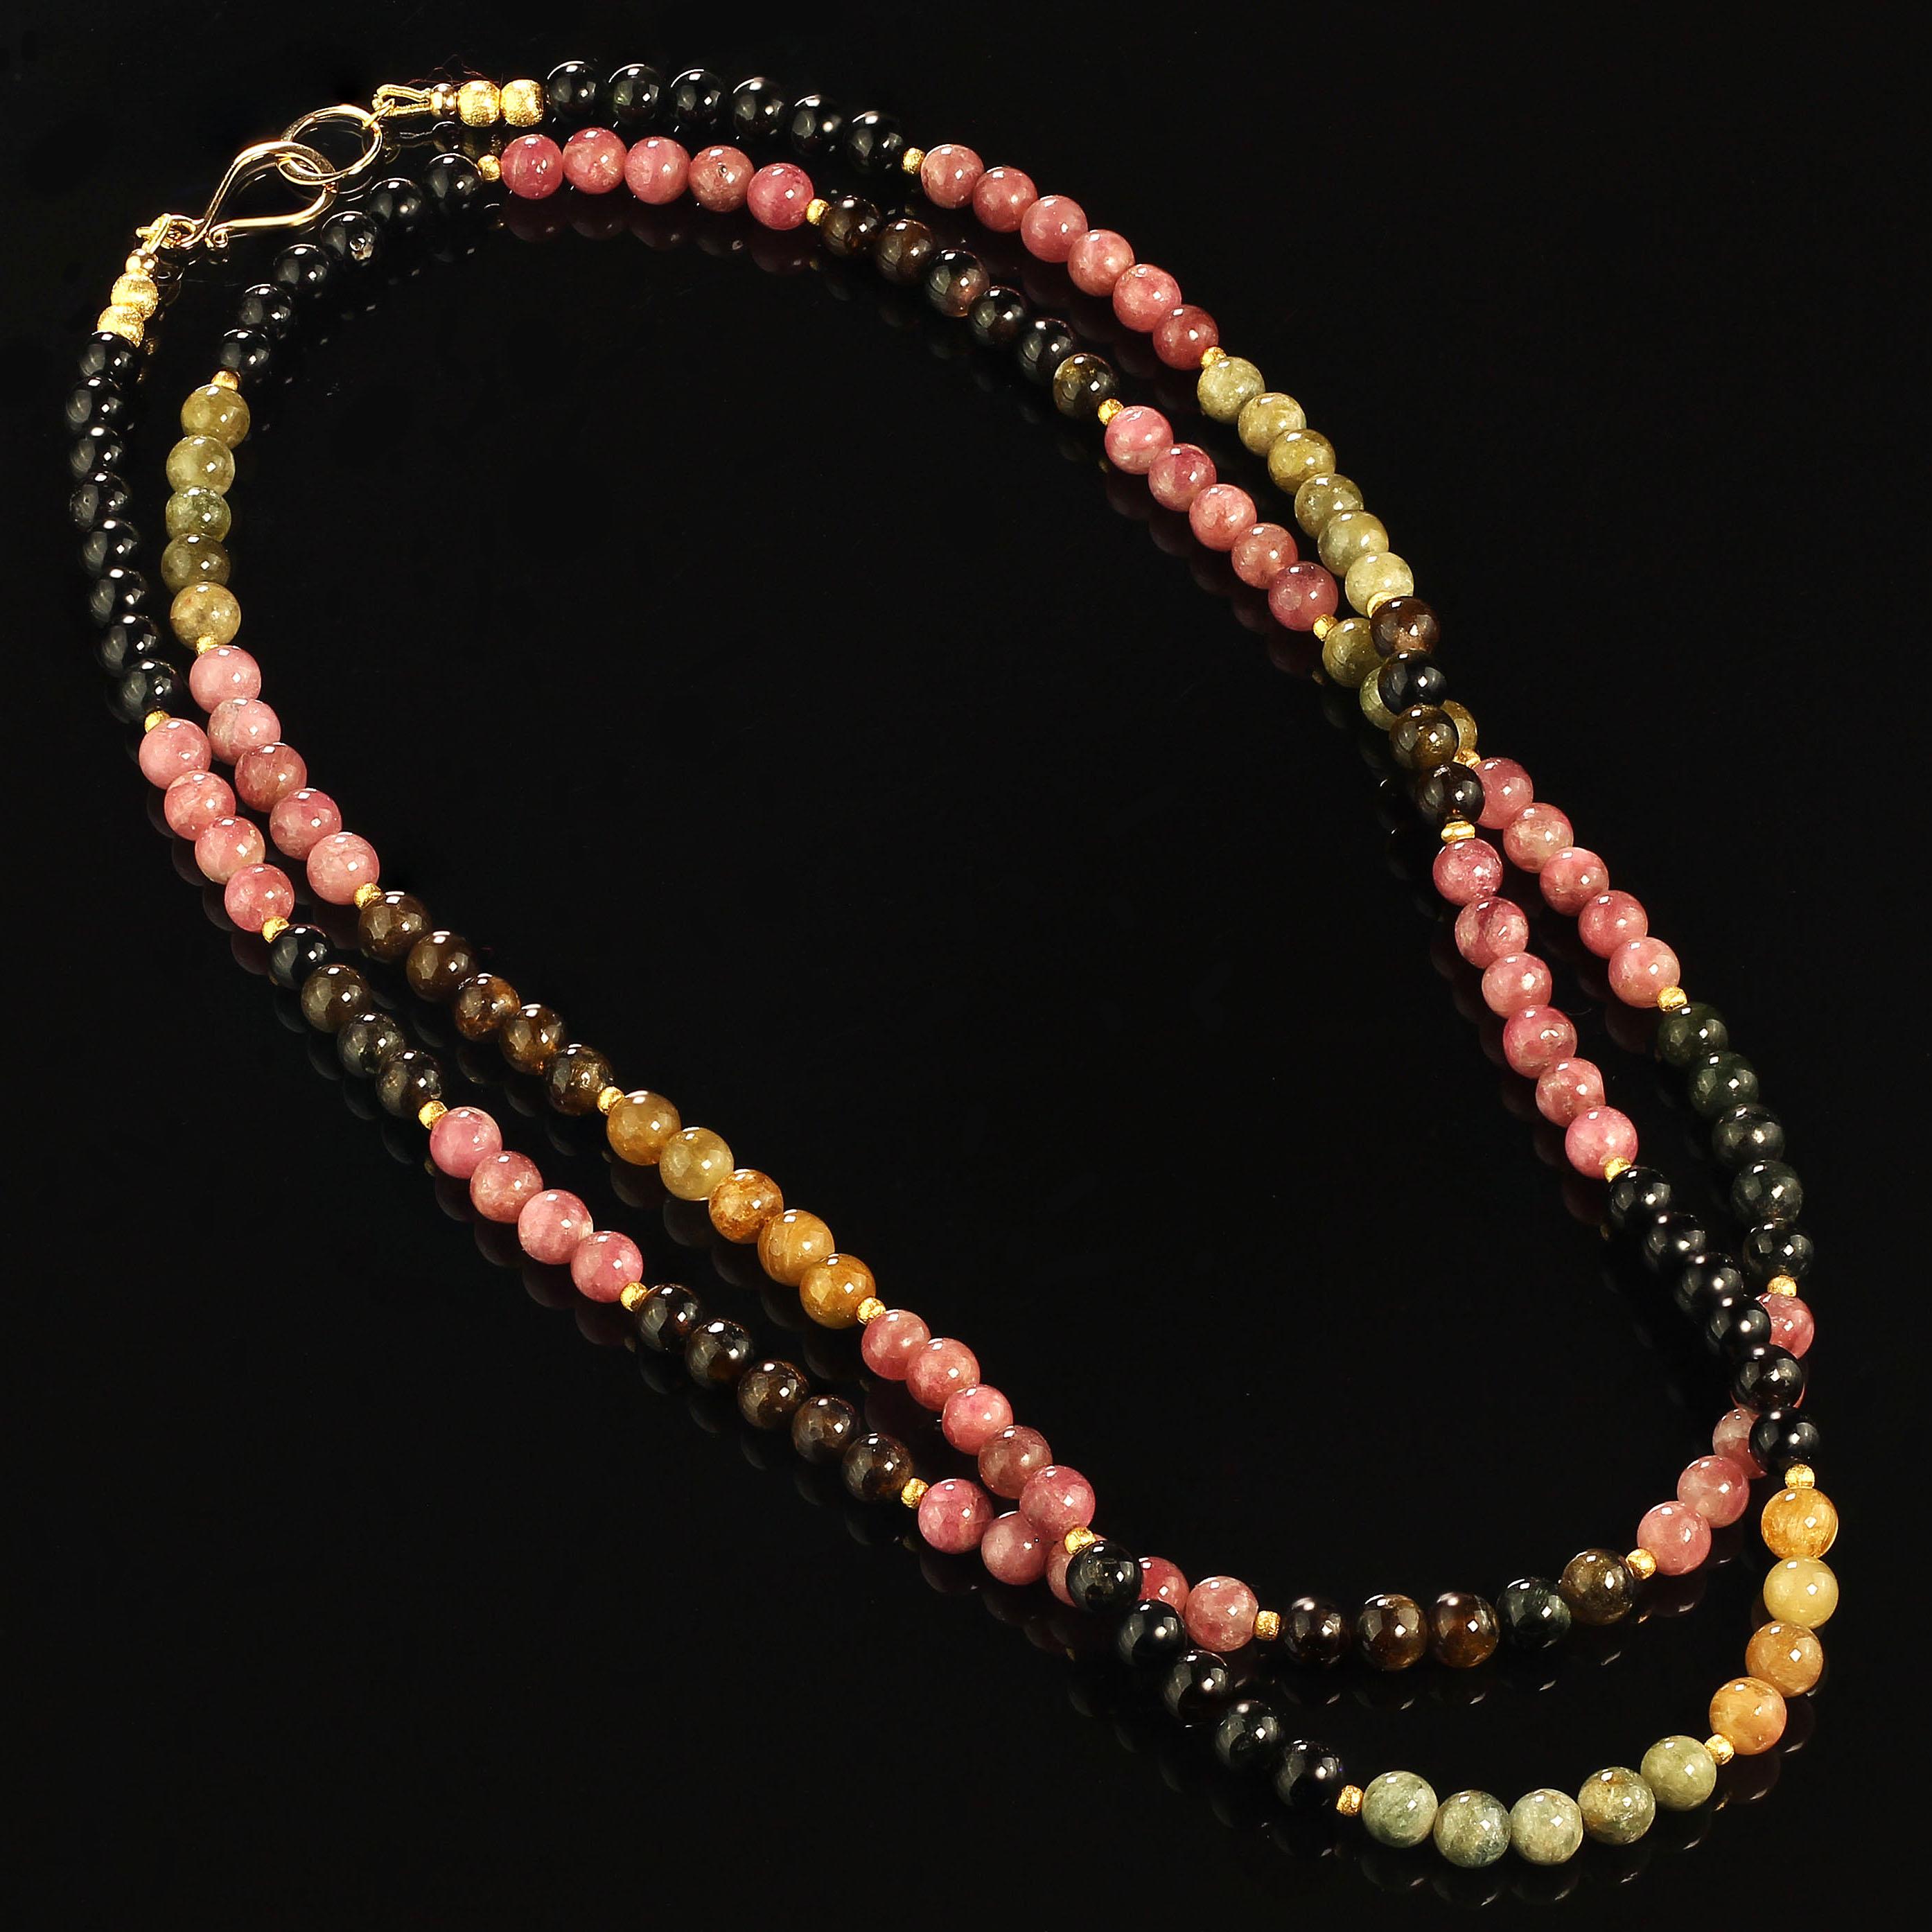 Elegant 37 inch multi color Tourmaline necklace to wear long or doubled.  This lovely long 37 inch necklace slips over collars and sits so nicely on blouses and sweaters.  These 5 MM highly polished Tourmalines are accented with frosted gold